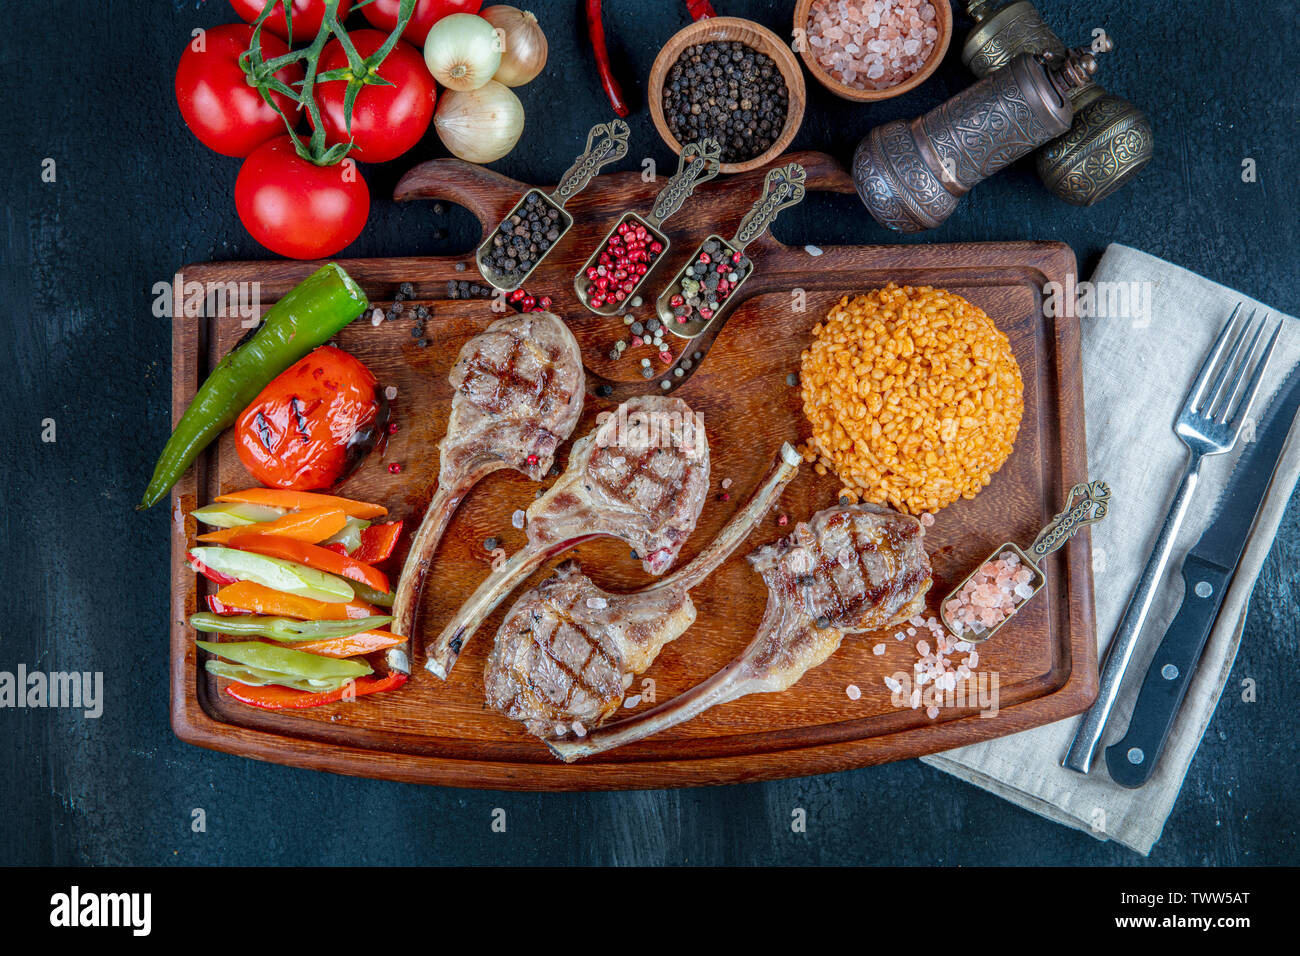 Lamb ribs grilled on cutting board with roasted vegetables. Top view Copy space Wooden background. Halal restaurant concept. Stock Photo